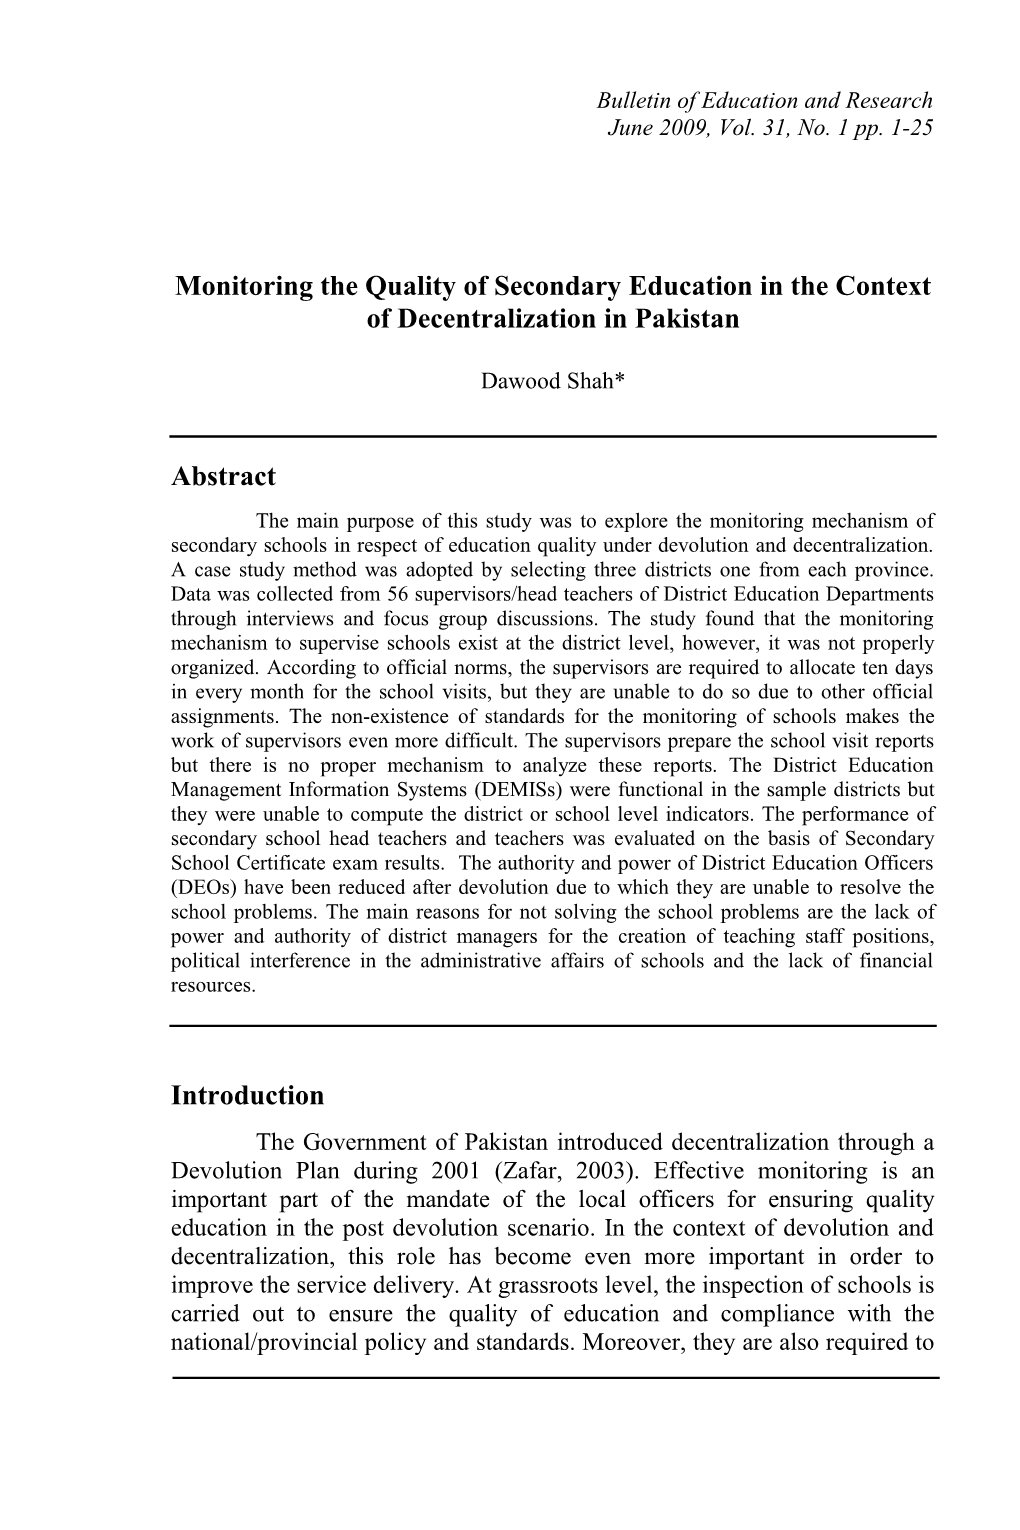 Monitoring the Quality of Secondary Education in the Context of Decentralization in Pakistan